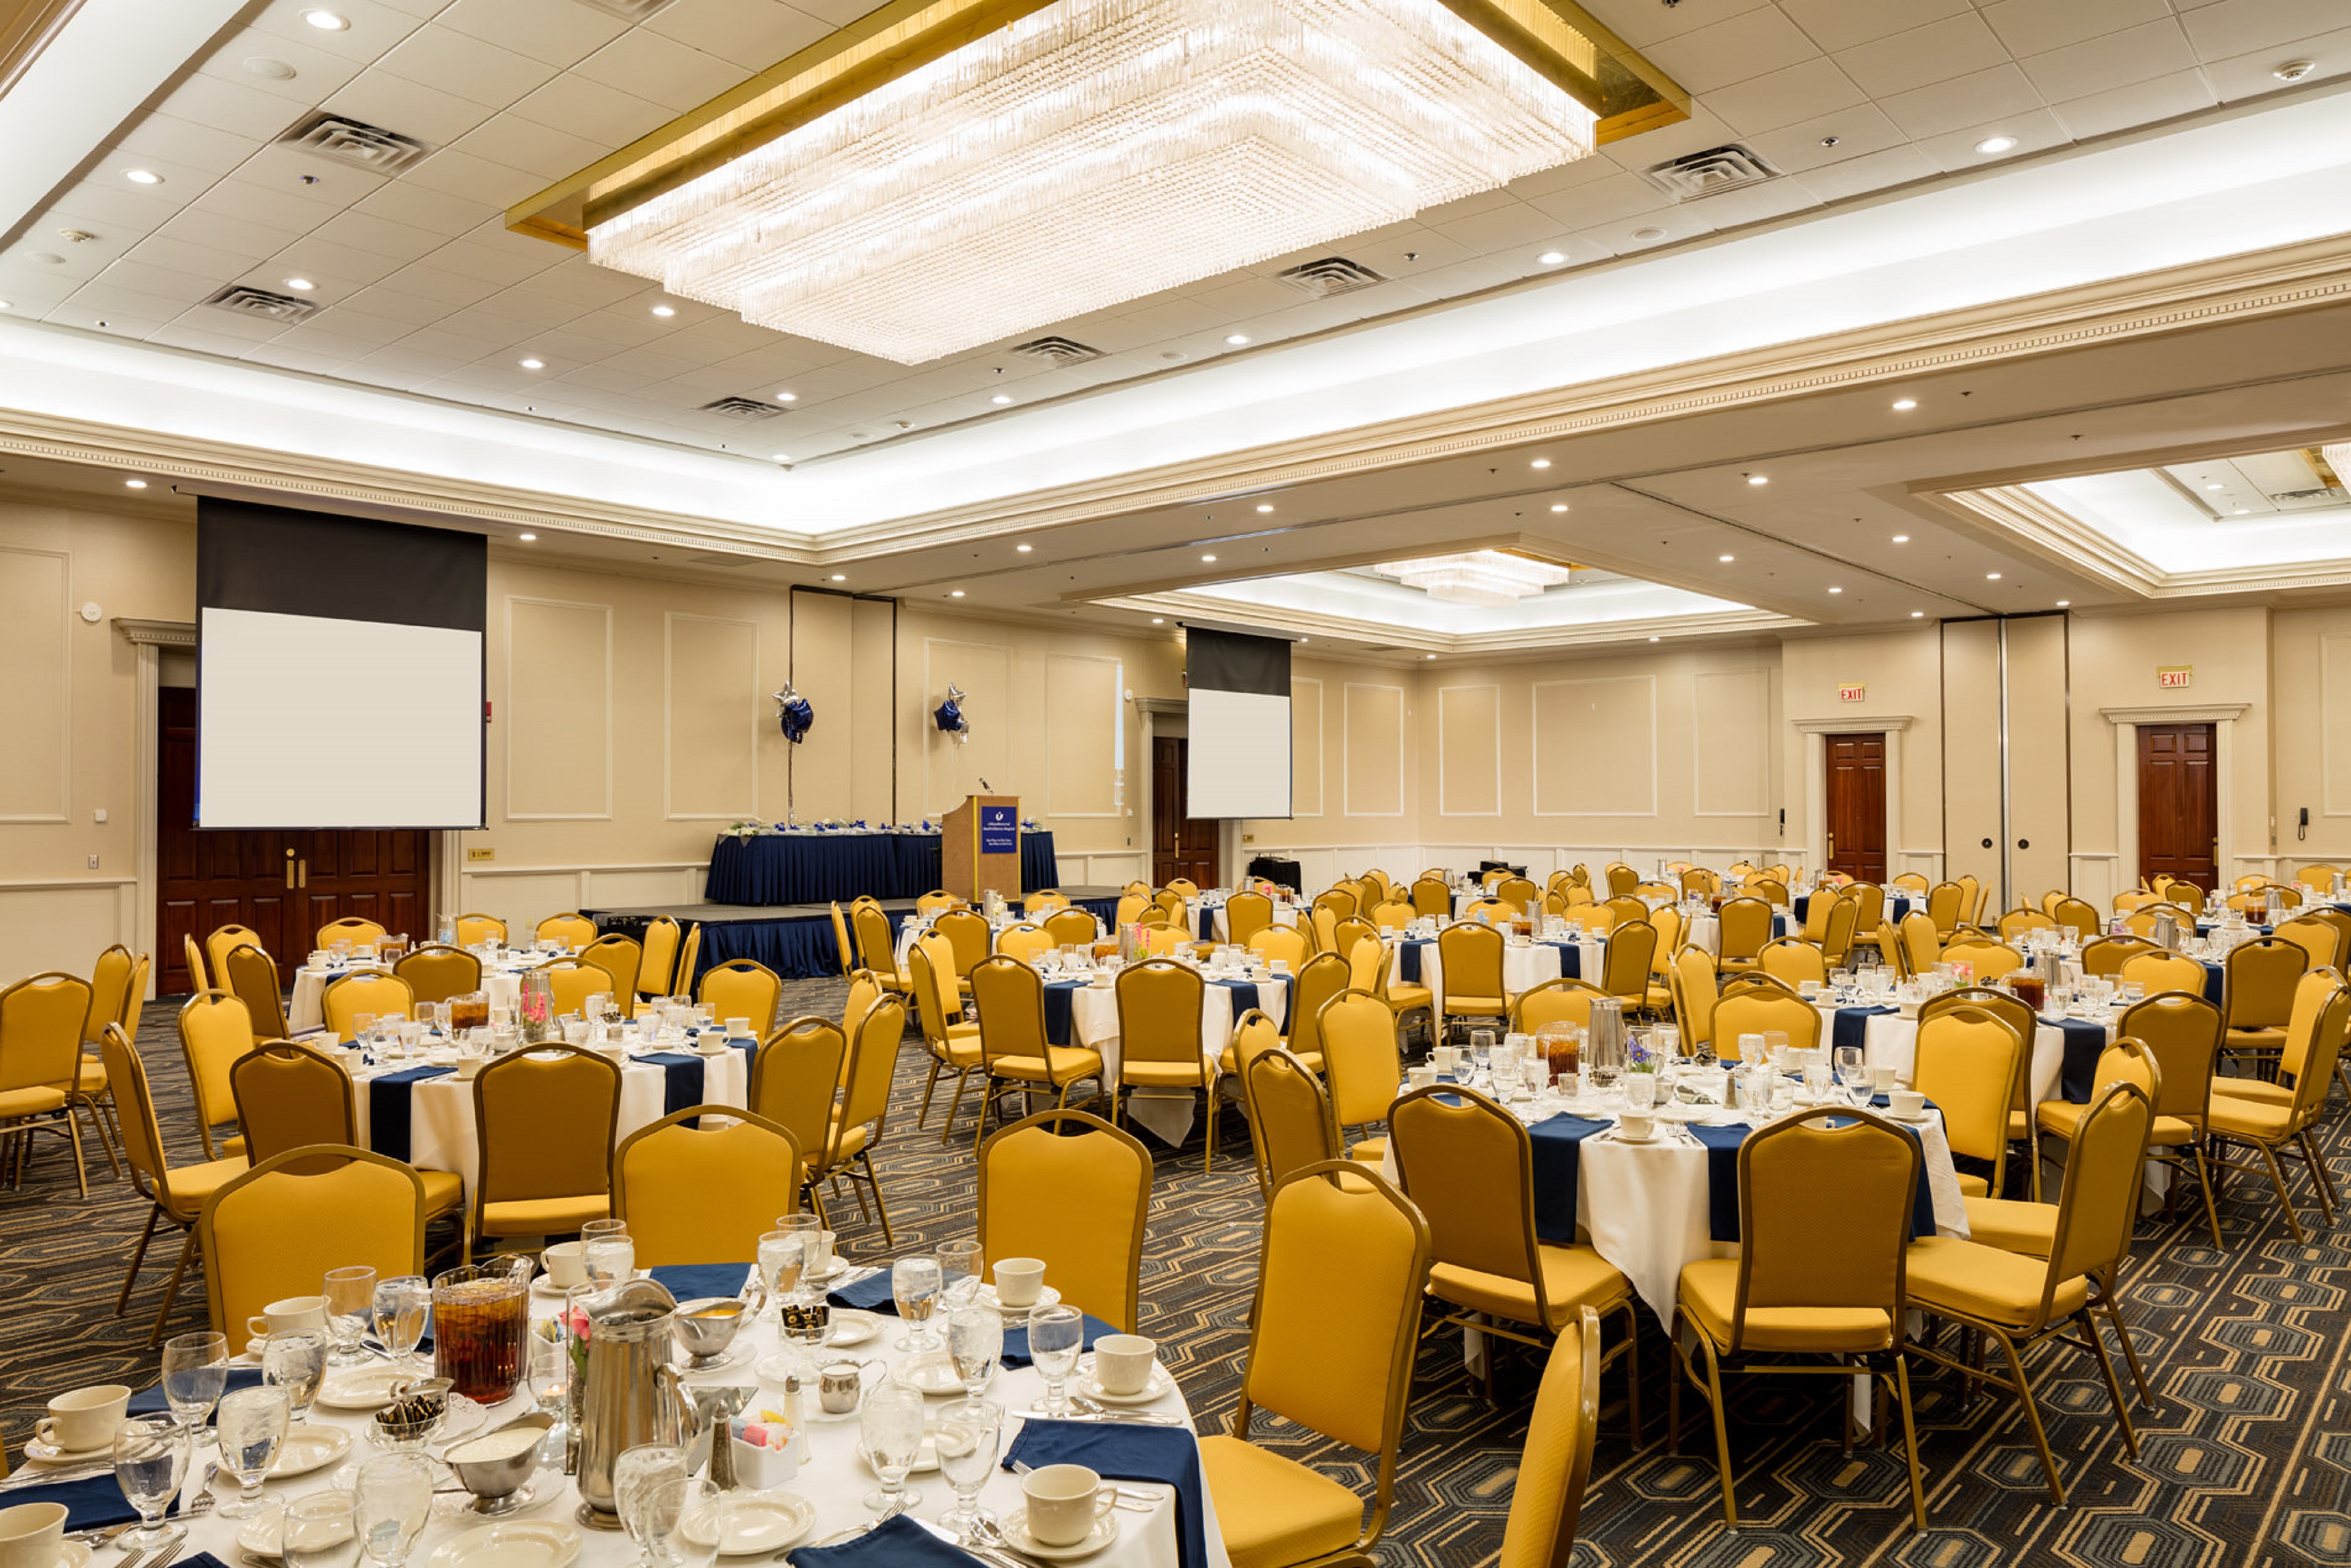 Ballroom Set Up for Special Event With Place Settings, Beverage Pitchers and Blue Napkins on Banquet Tables With White Linens, Yellow Chairs, Two Presentation Screen, and Stage With Podium